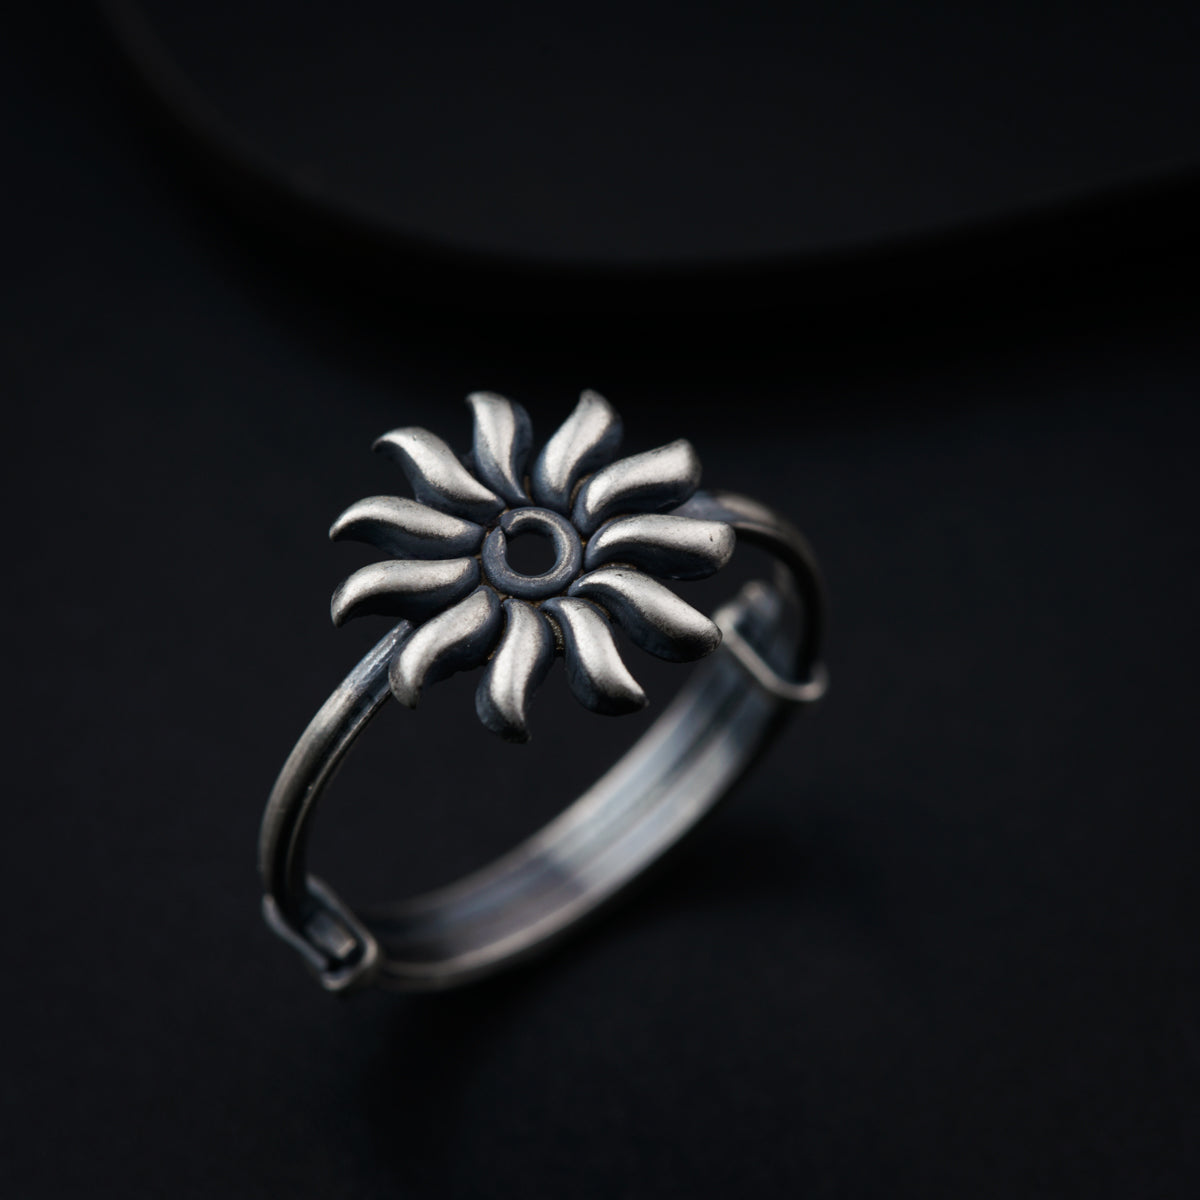 a silver ring with a flower design on it